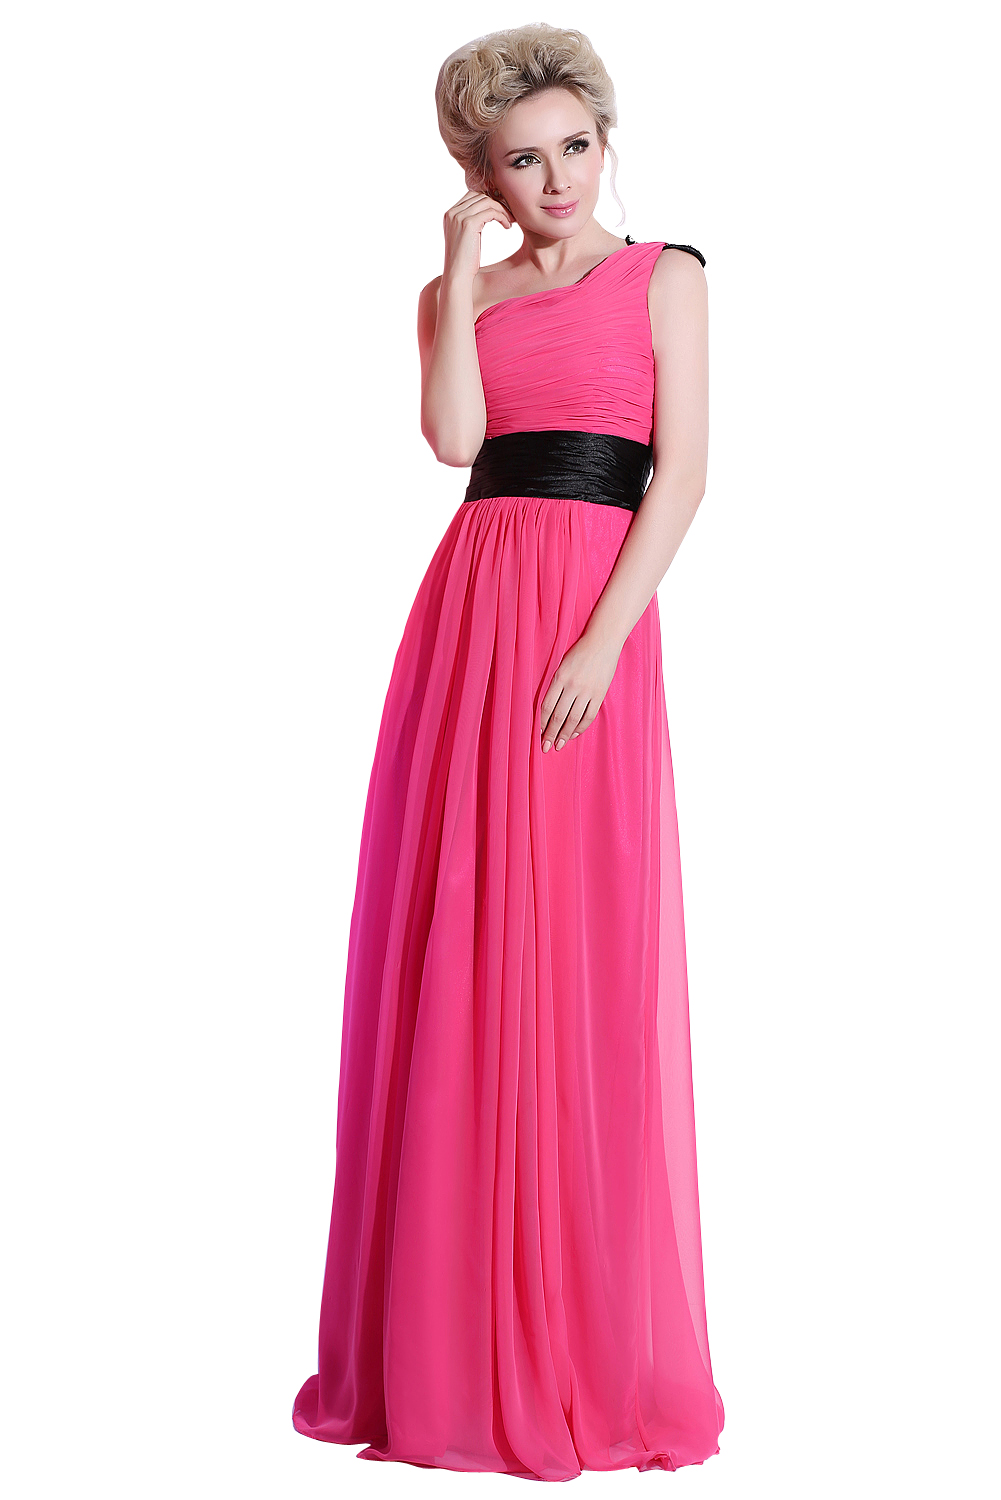 Lengthy bridesmaid dresses are suitable for high bridesmaids